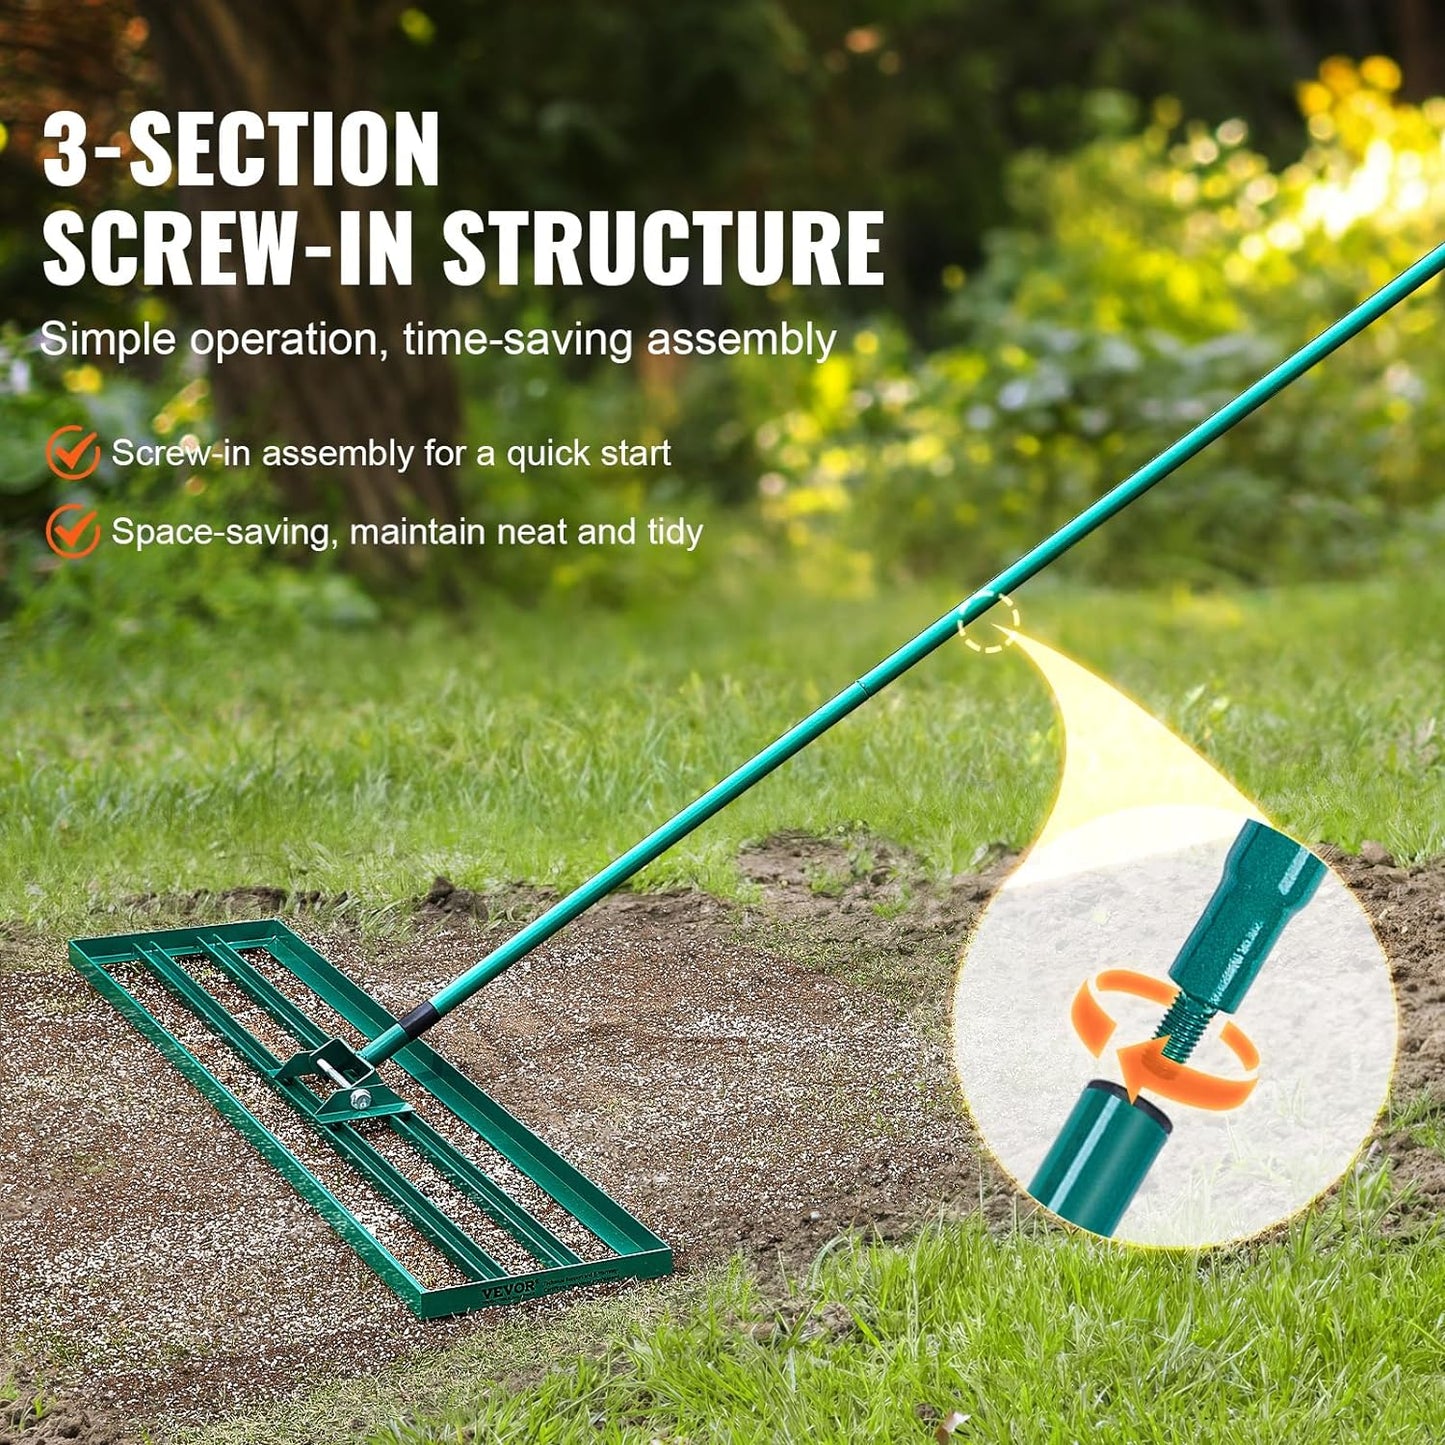 Lawn Leveling Rake, 48"x10" Level Lawn Tool, Heavy-Duty Lawn Leveler with 78" Steel Extended Handle, Yard Leveling Rake Suit for Garden, Golf Lawn, Farm